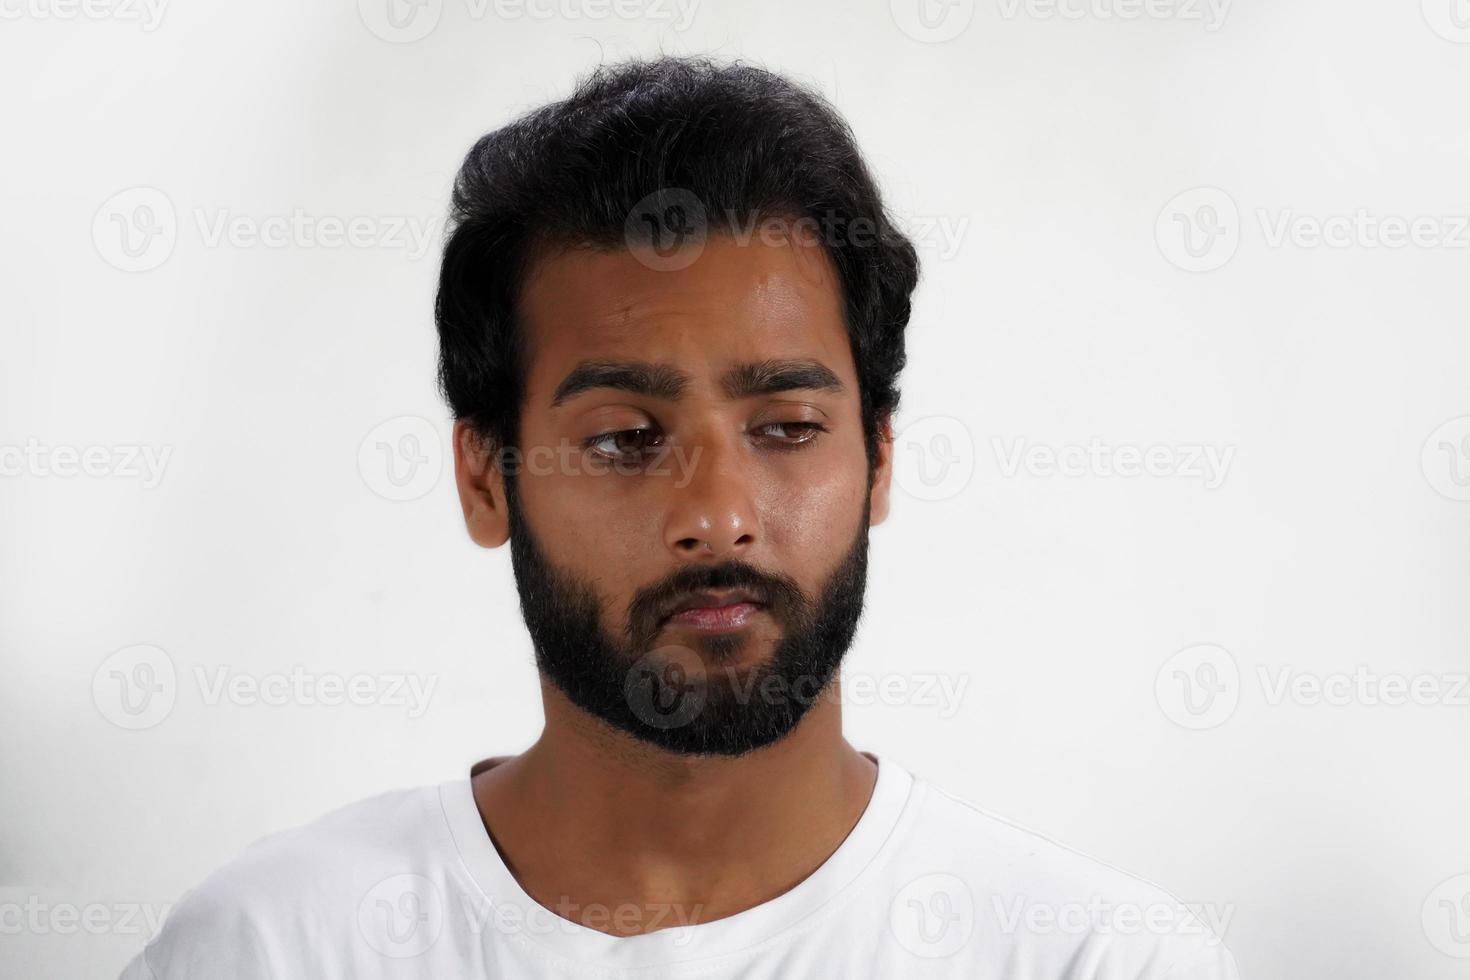 A Sad young Man portrait in white background photo